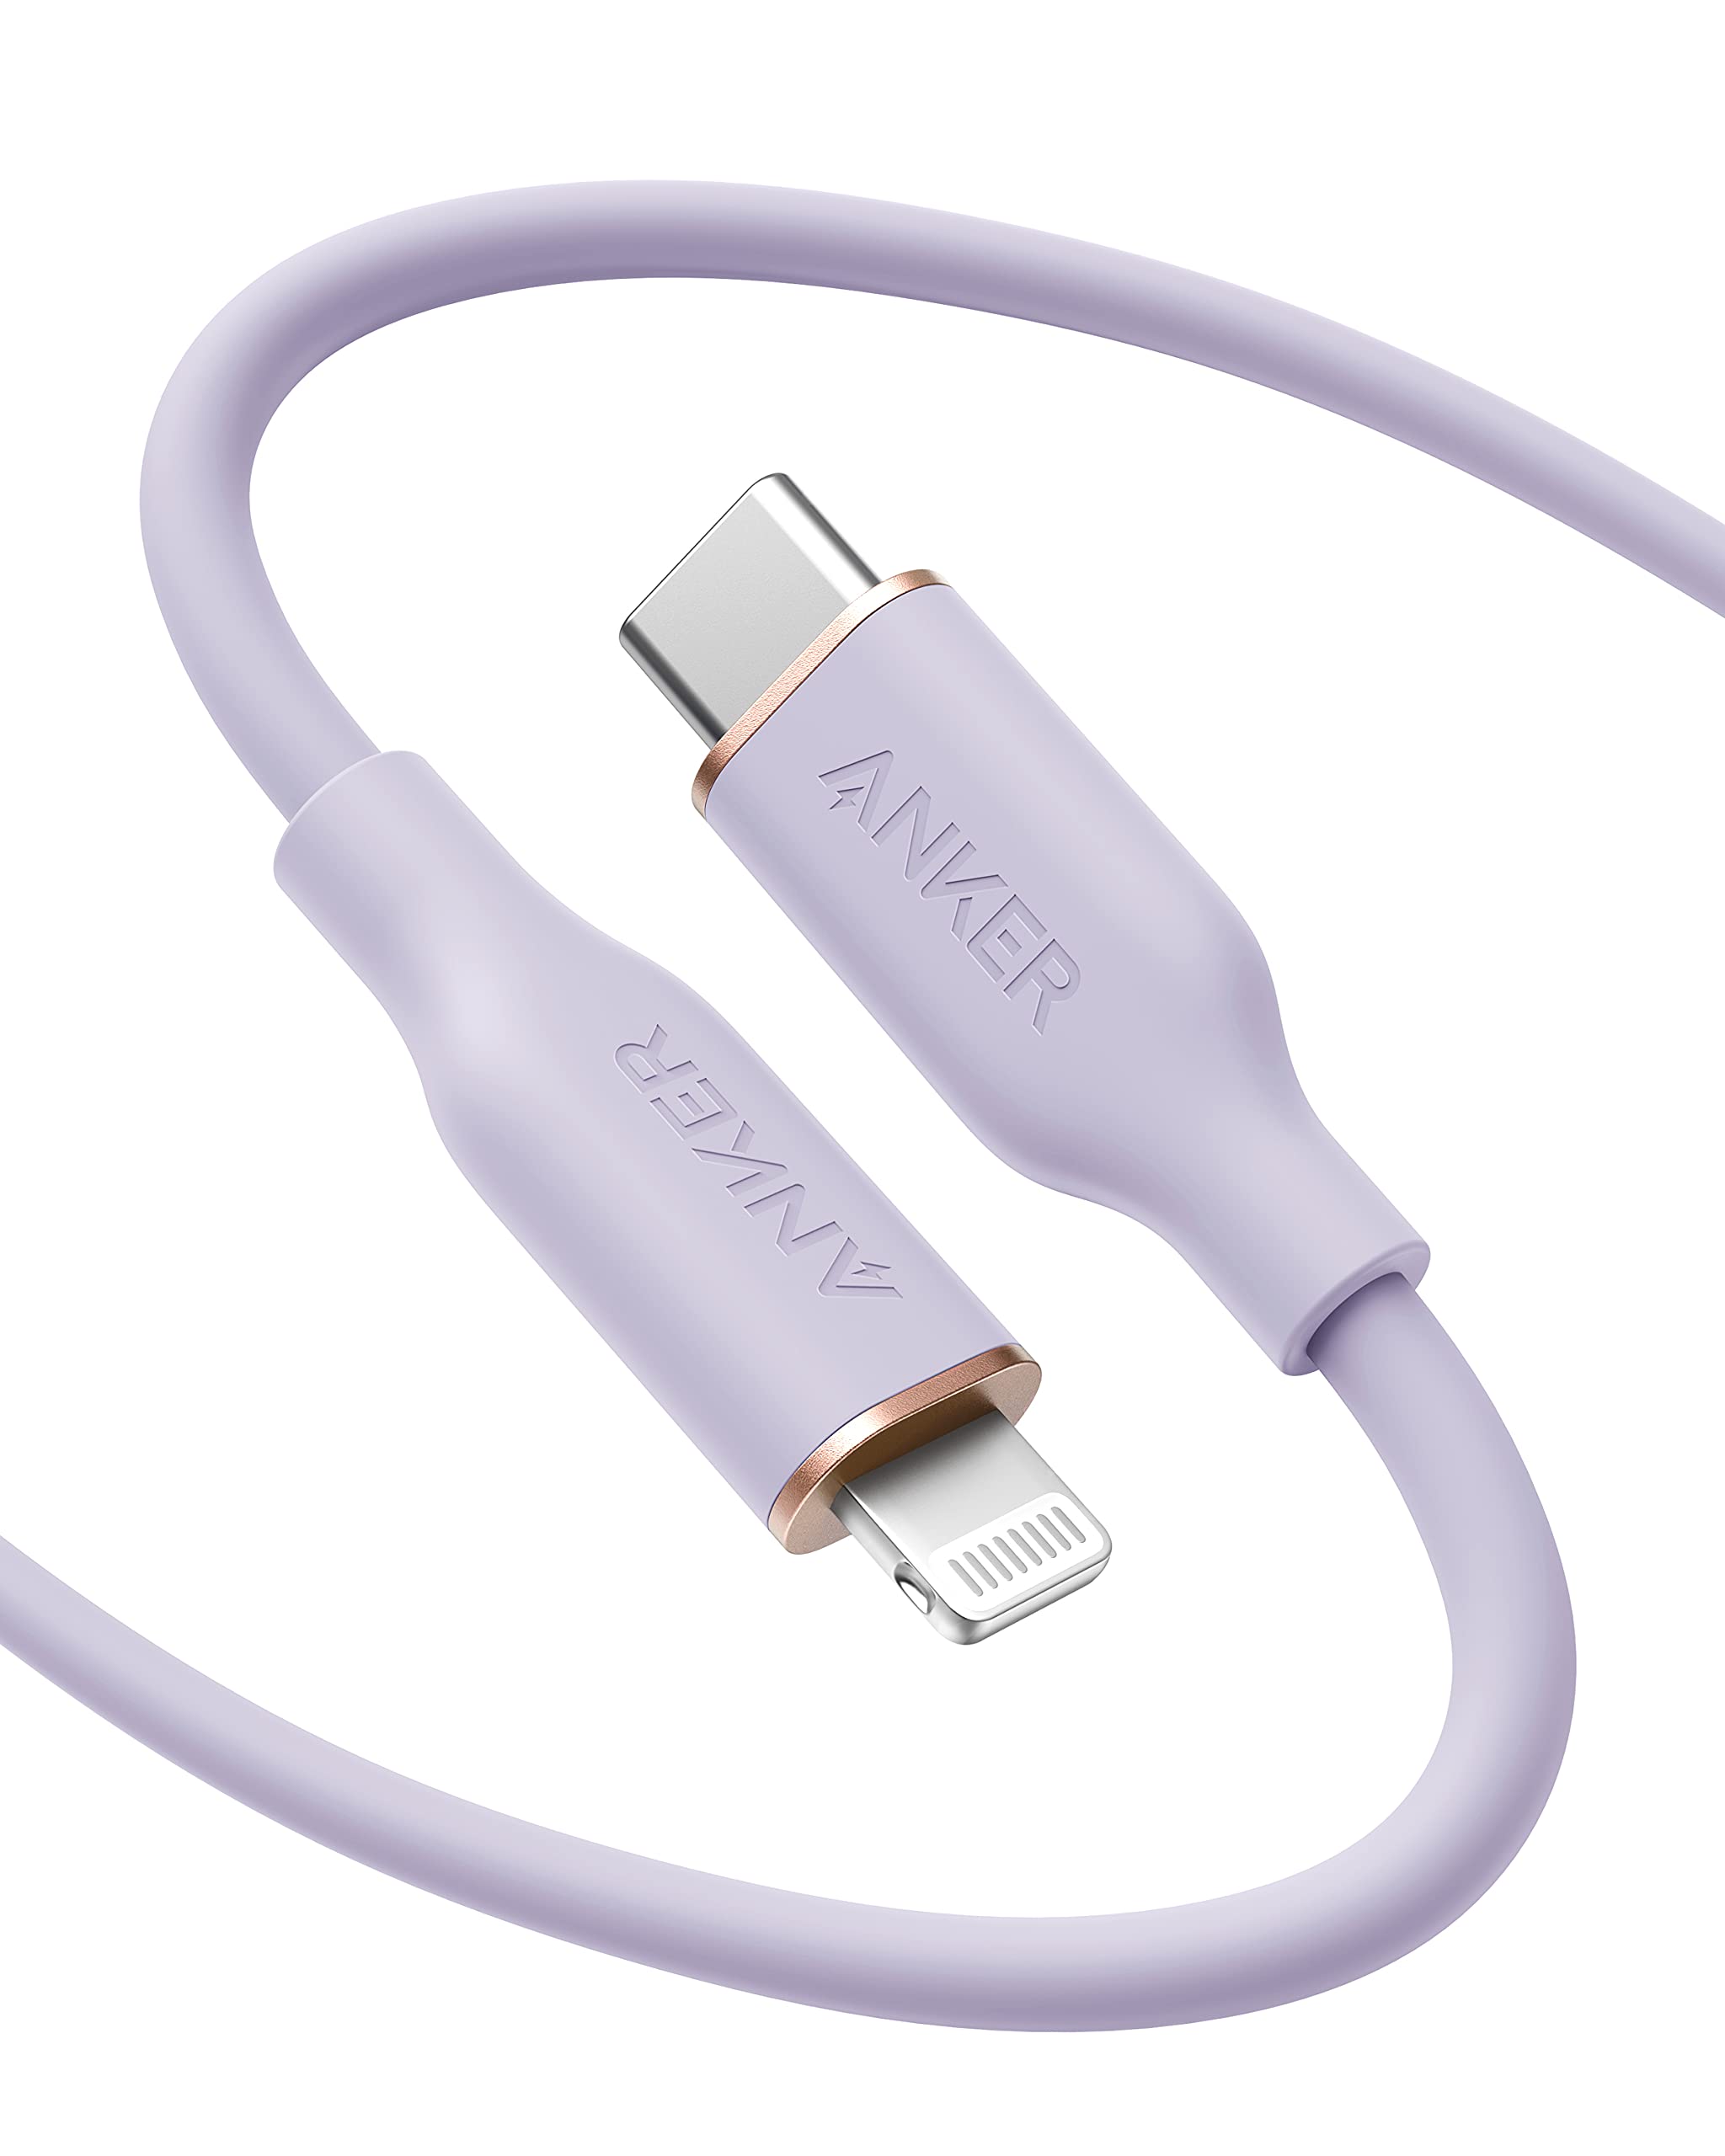 Anker 641 USB-C to Lightning Cable (Flow, Silicone)